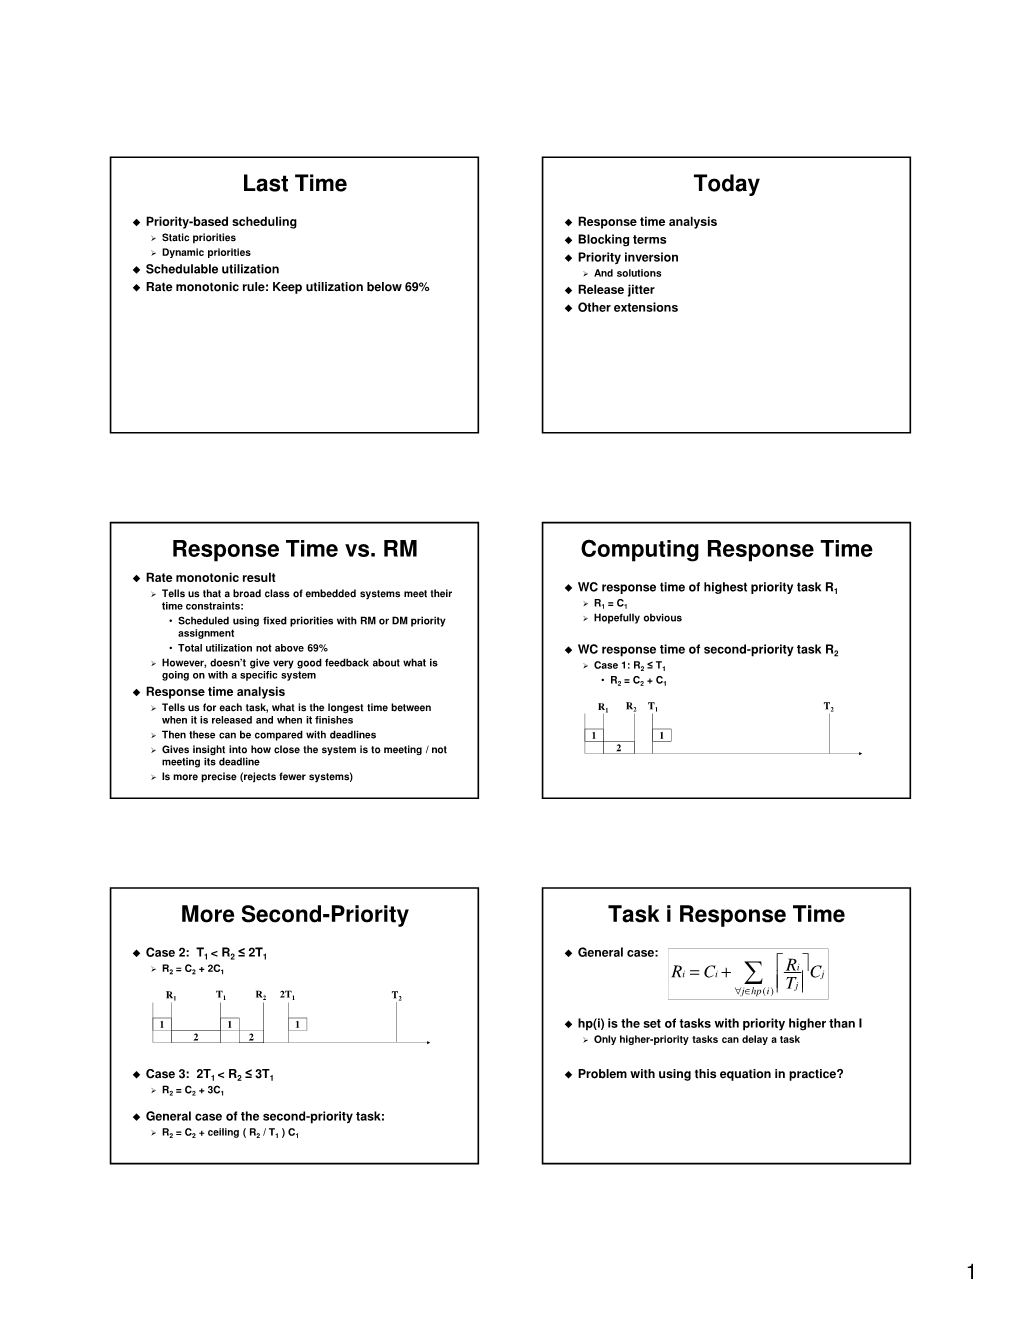 Last Time Today Response Time Vs. RM Computing Response Time More Second-Priority Task I Response Time